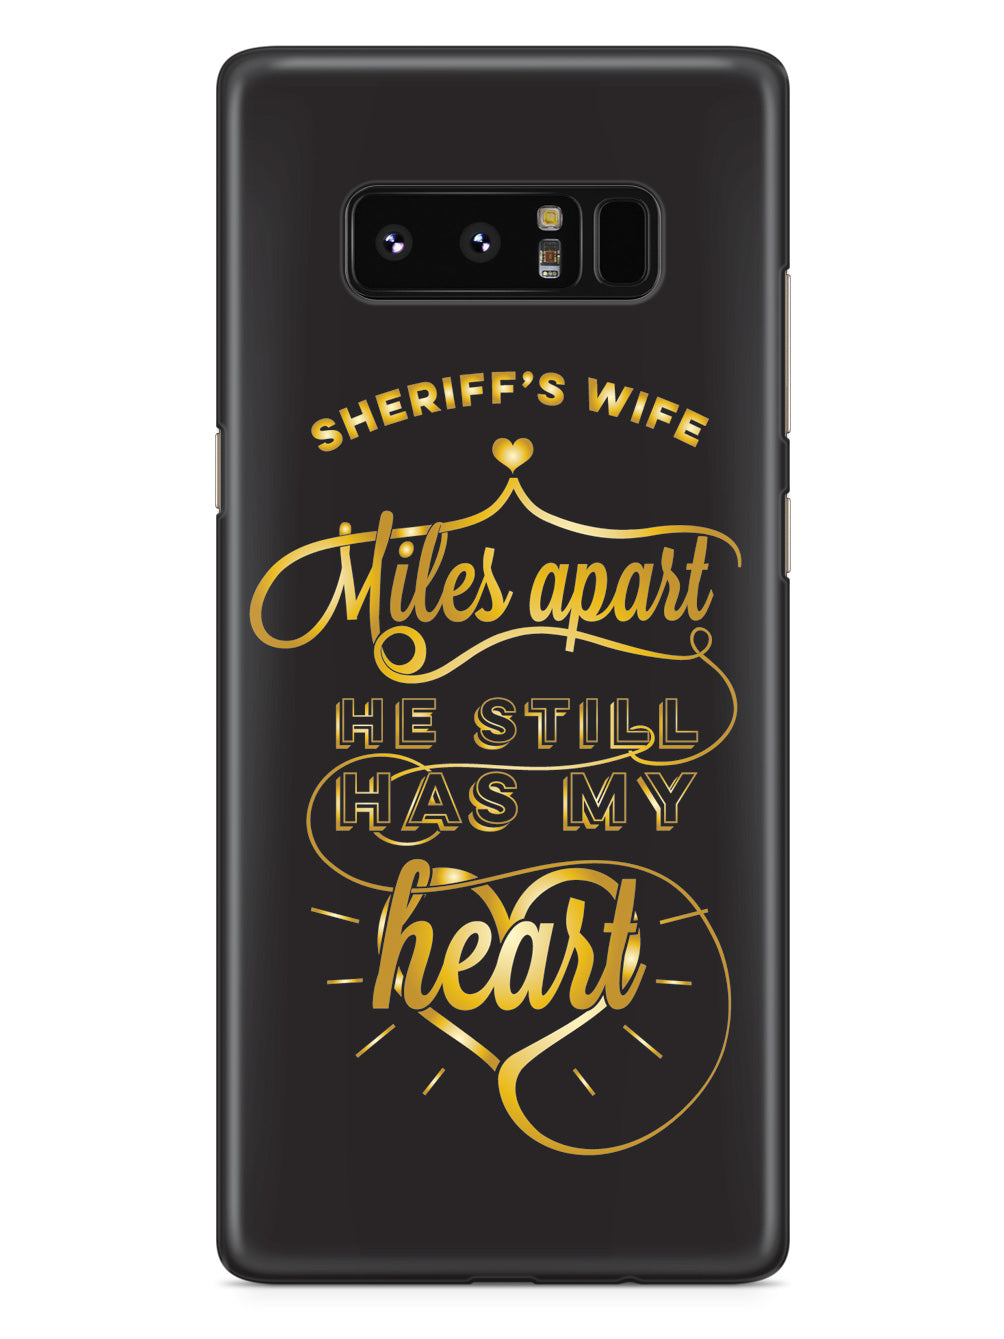 Sheriff's Wife - Miles Apart, Still Has My Heart Case